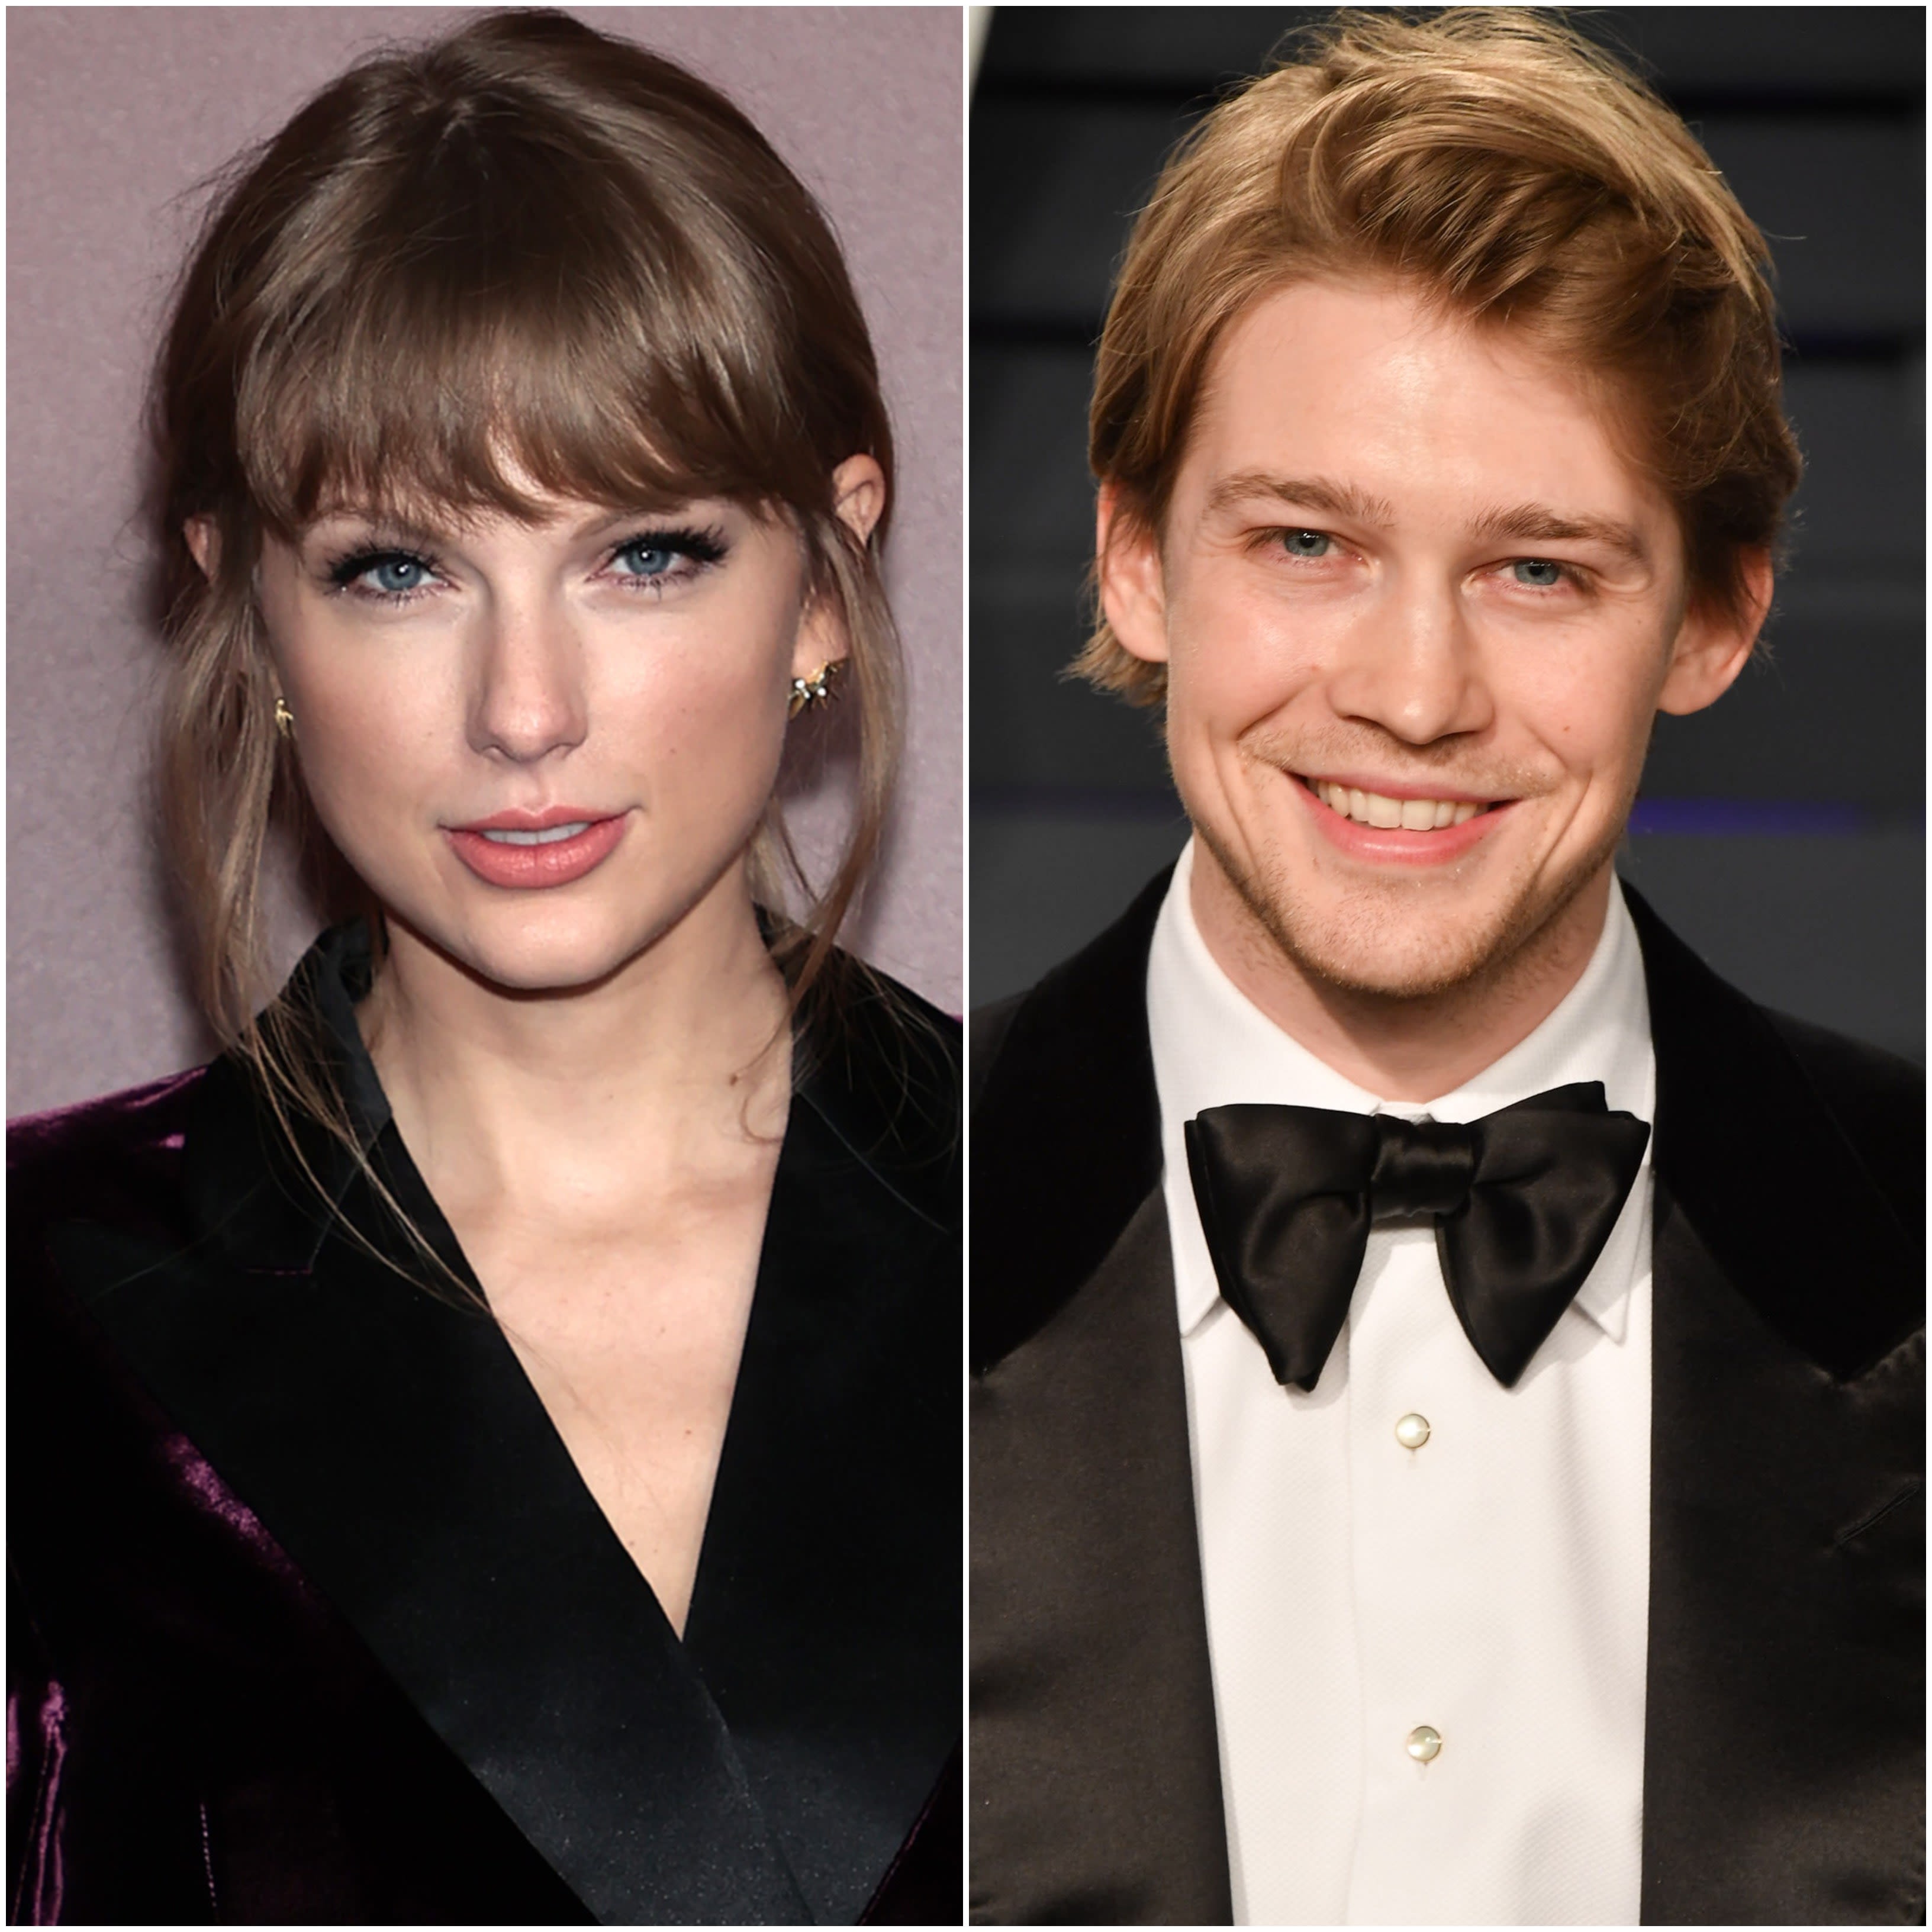 The Joe Alwyn Group Chat That Inspired Taylor Swift's Album Is Not as Active as We Thought